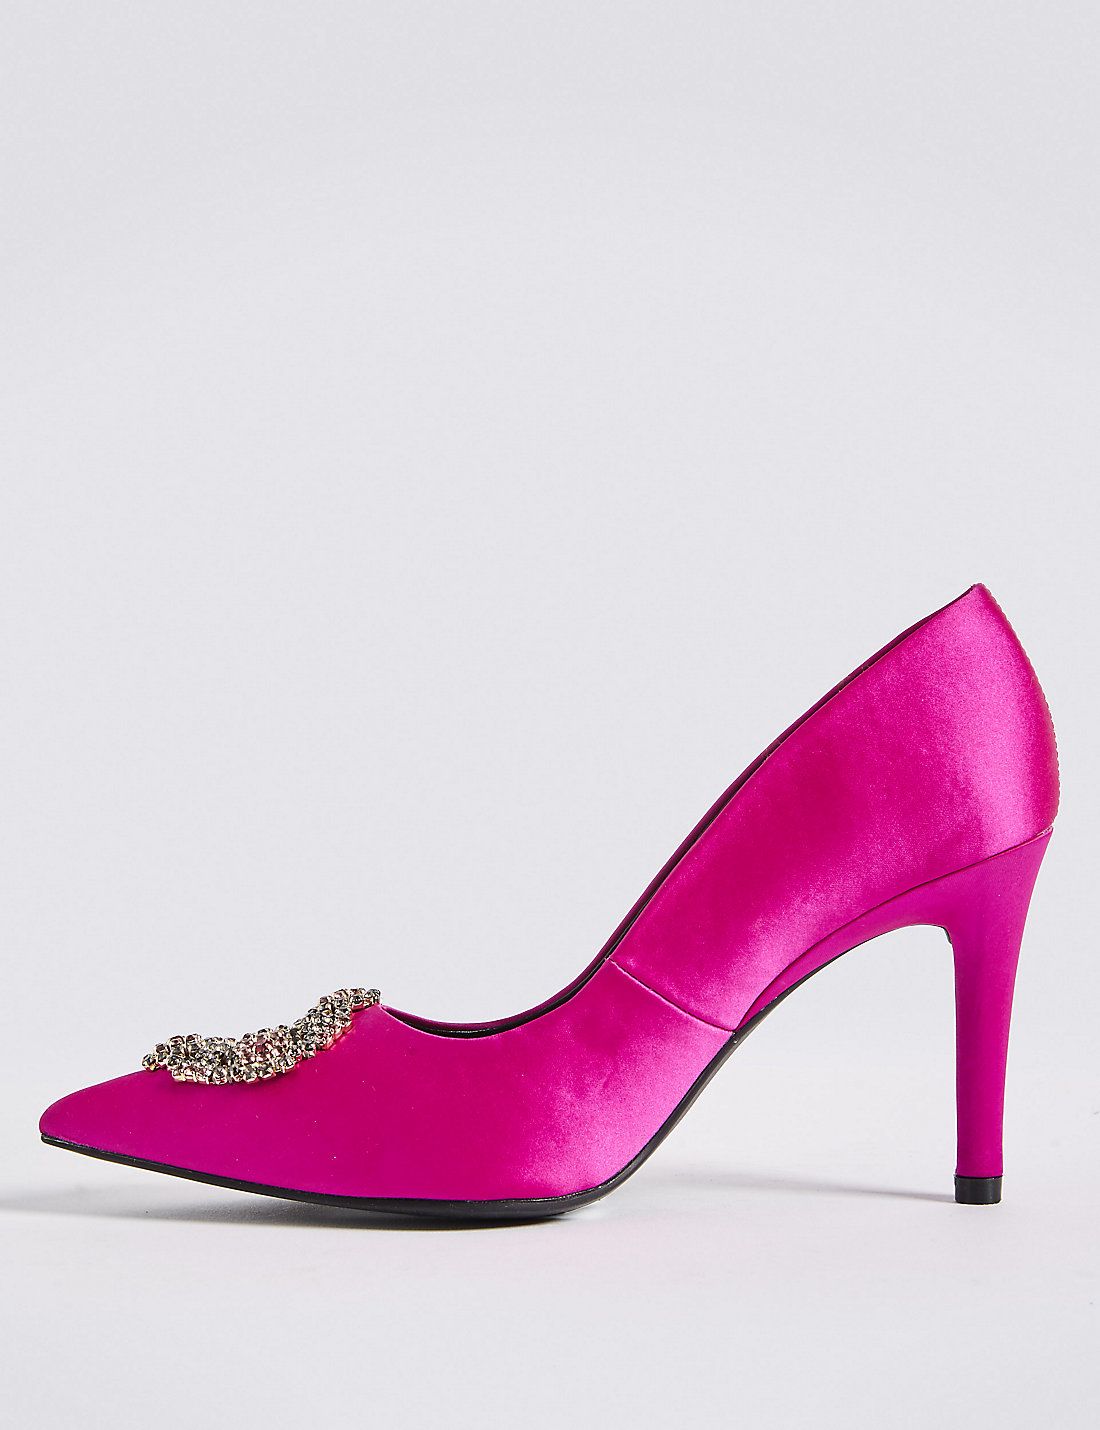 marks and spencer pink shoes